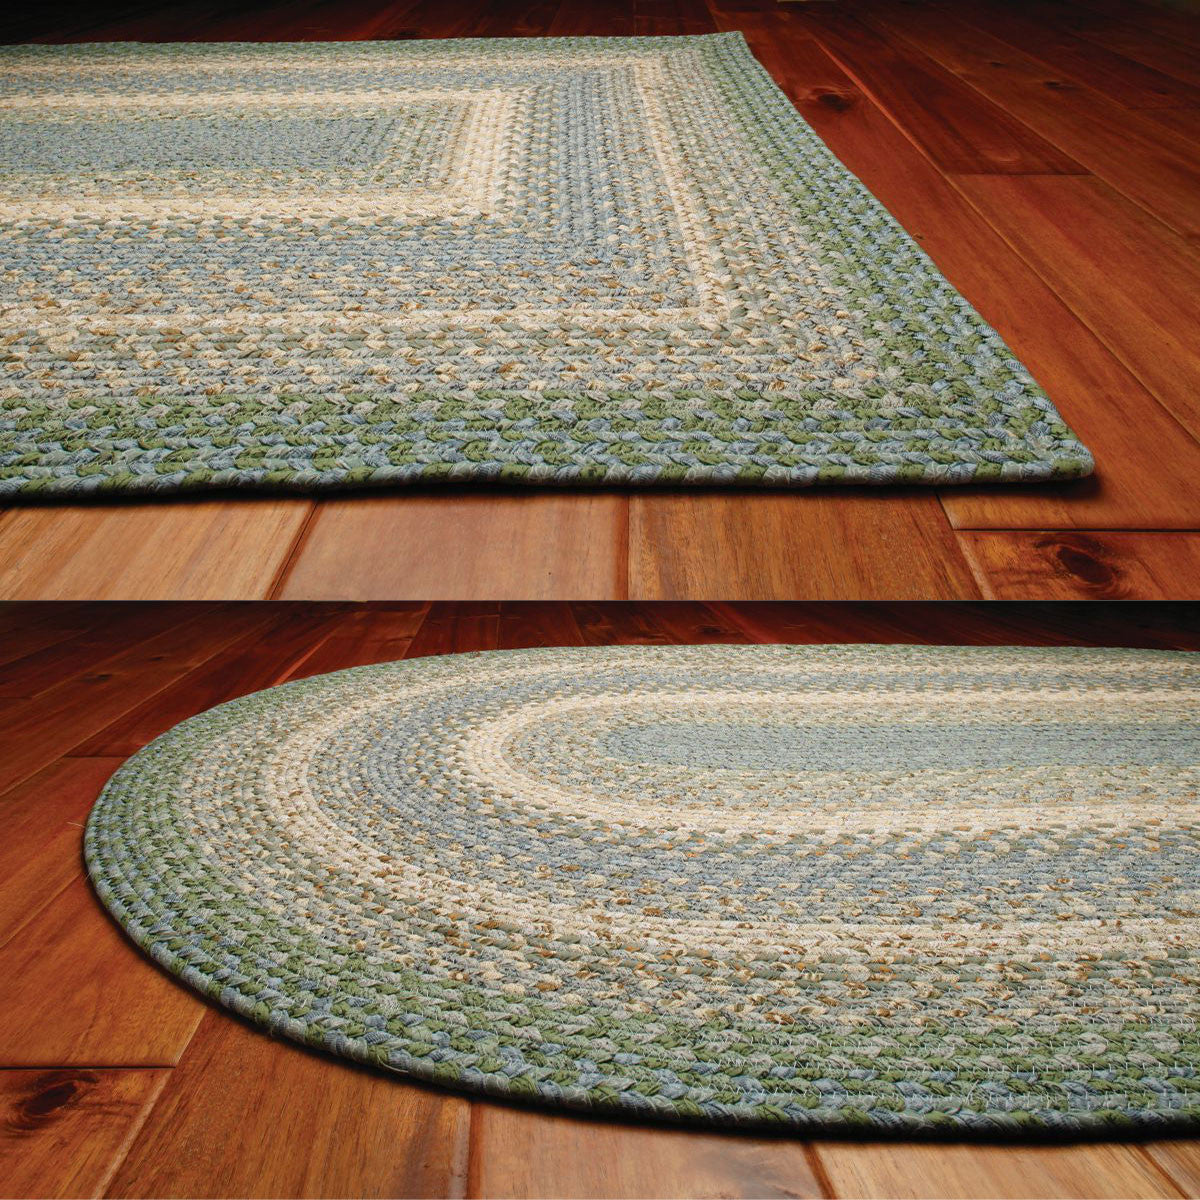 Baja Blue Cotton Braided Rug  Country Primitive Braided Rug by